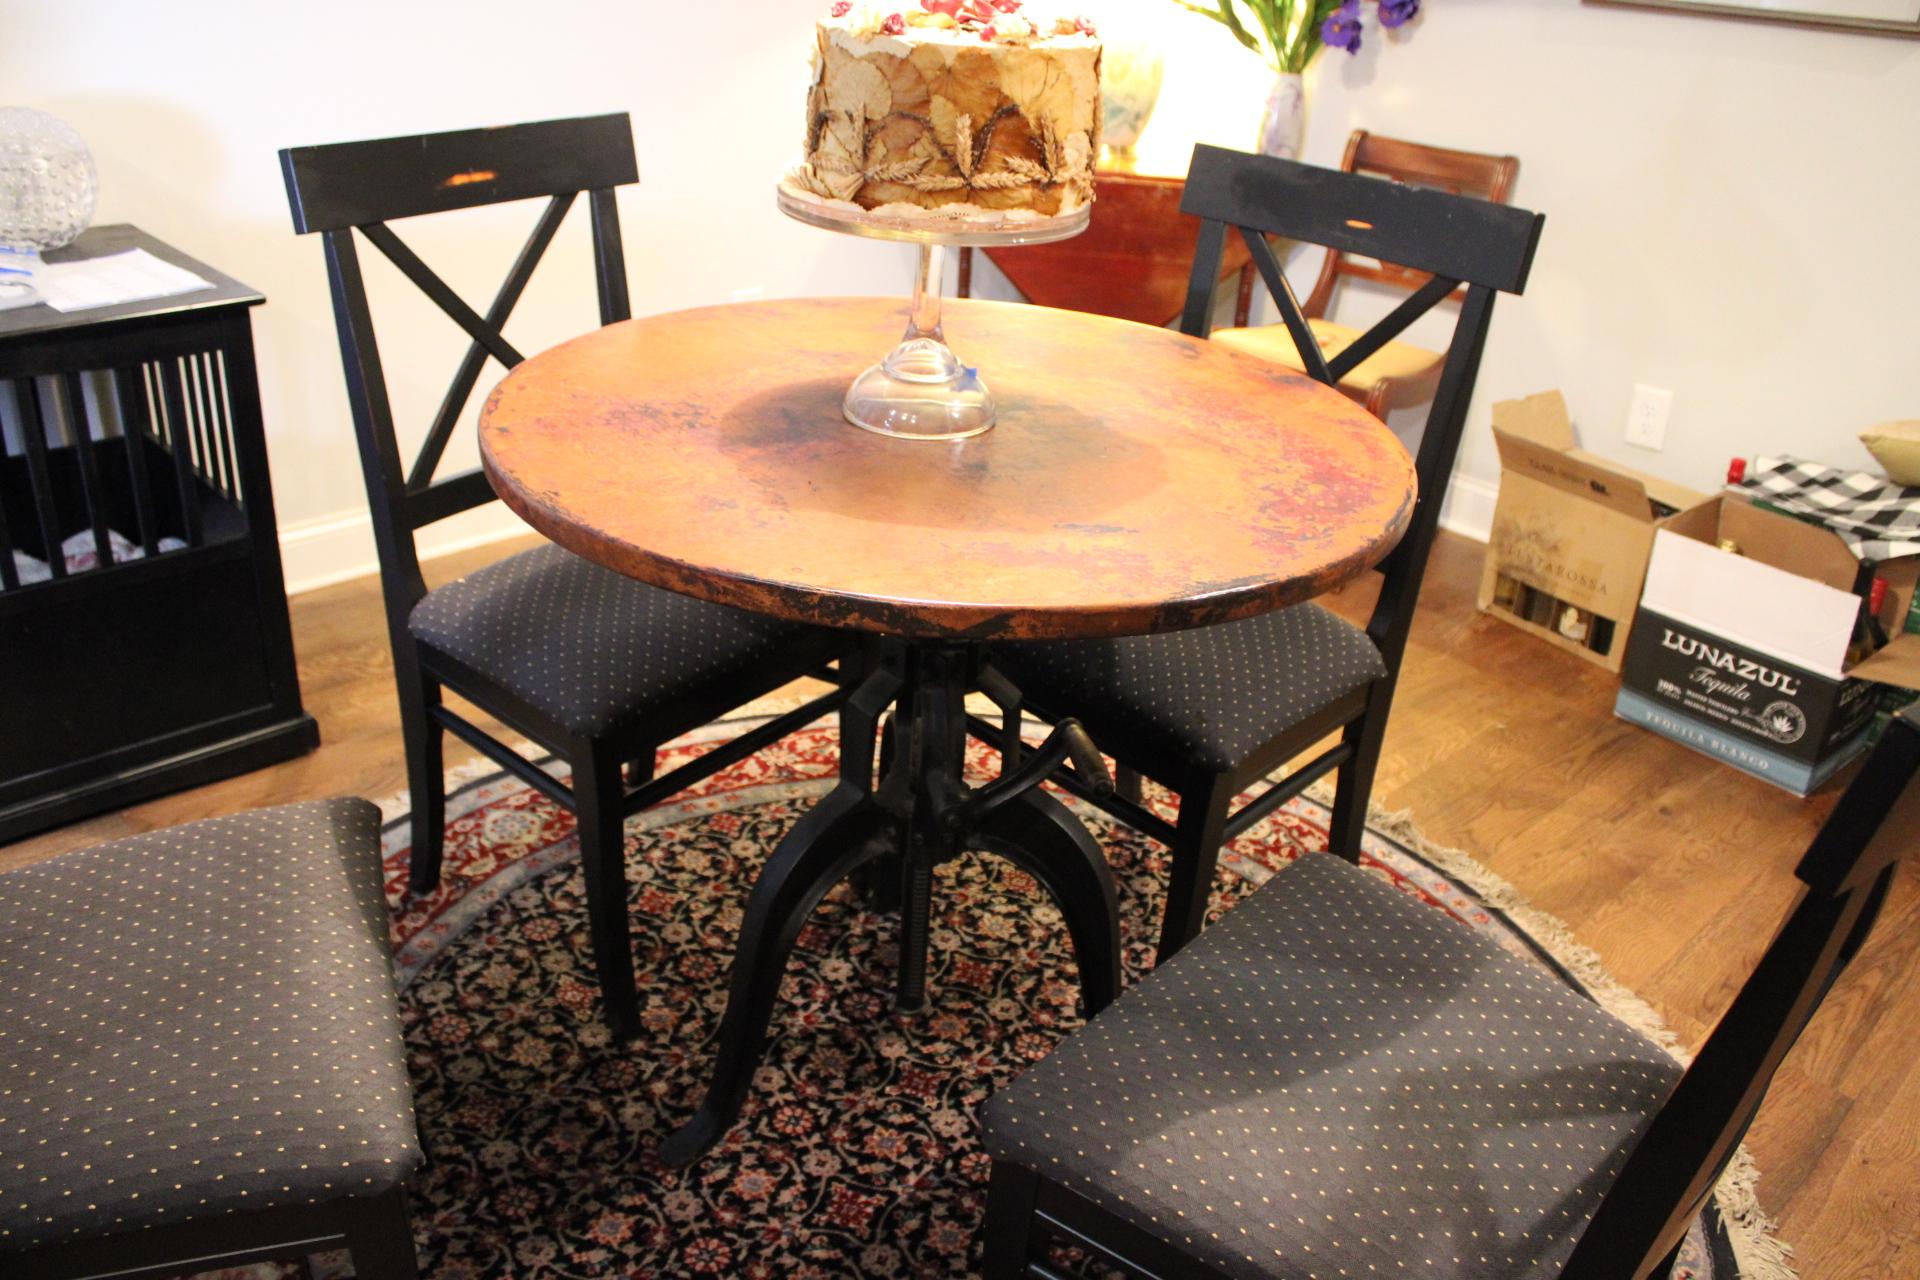 Copper Top Dining Table, Chairs and Rug